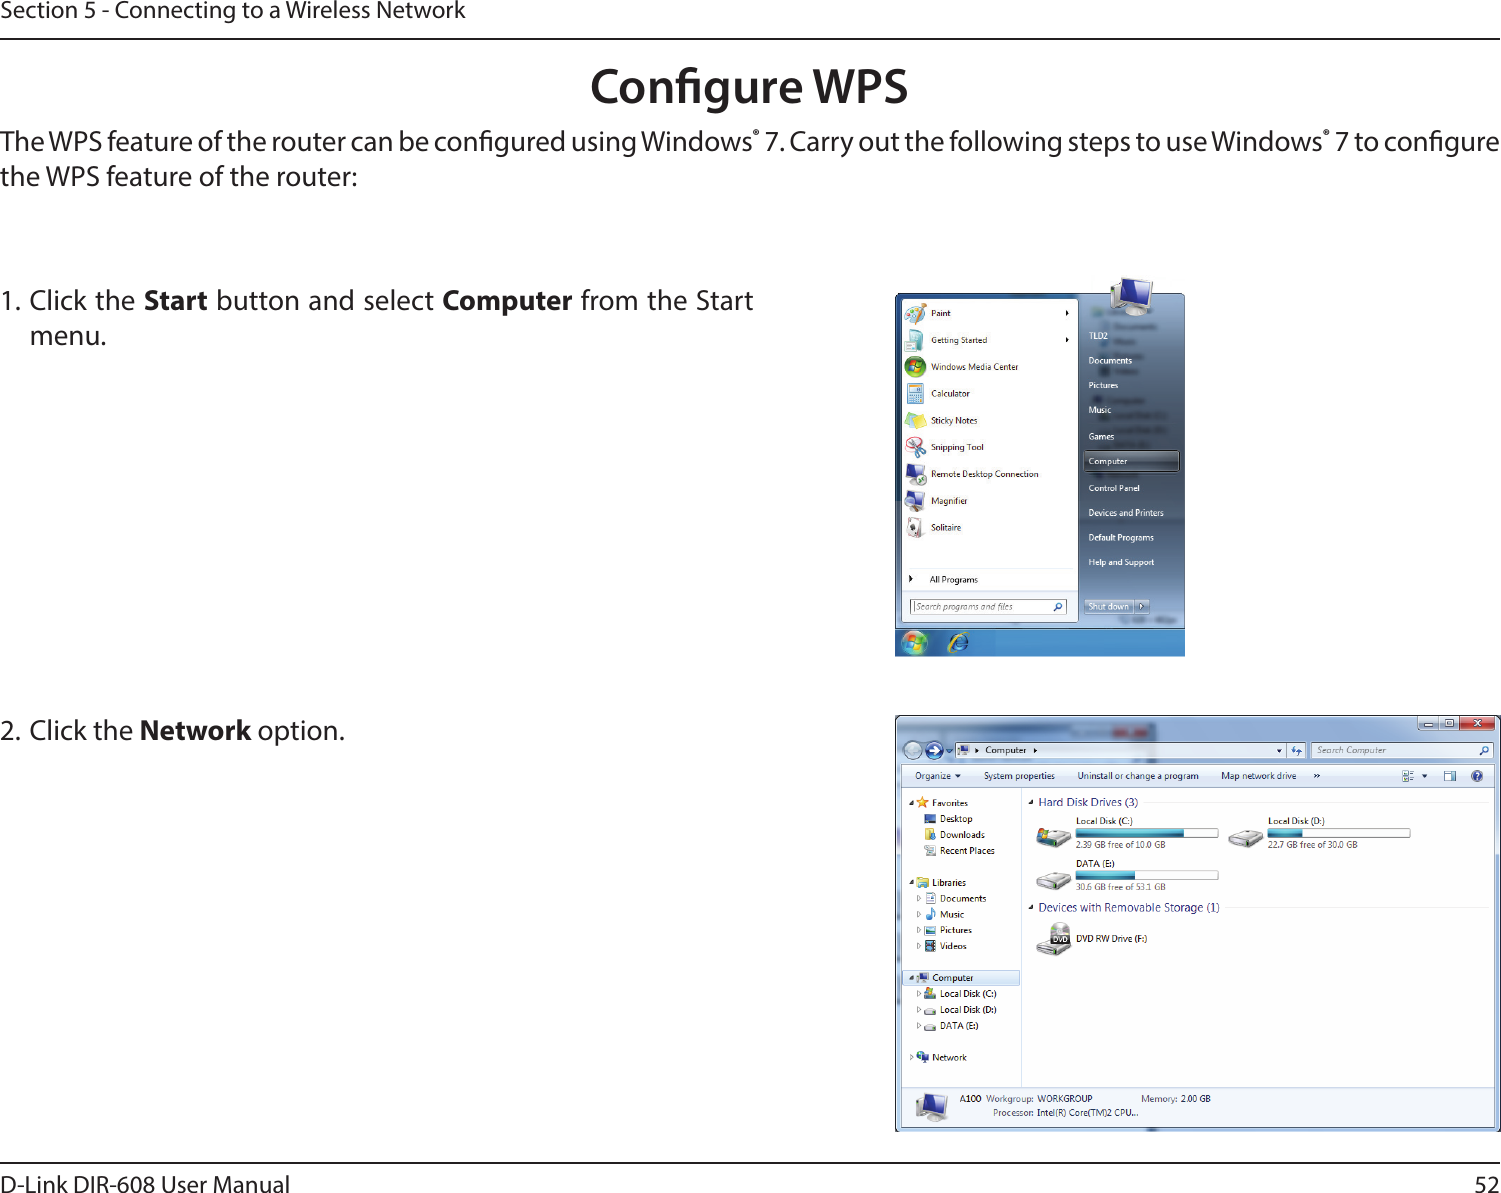 52D-Link DIR-608 User ManualSection 5 - Connecting to a Wireless NetworkCongure WPSThe WPS feature of the router can be congured using Windows® 7. Carry out the following steps to use Windows® 7 to congure the WPS feature of the router:1. Click the Start button and select Computer from the Start menu.2. Click the Network option.